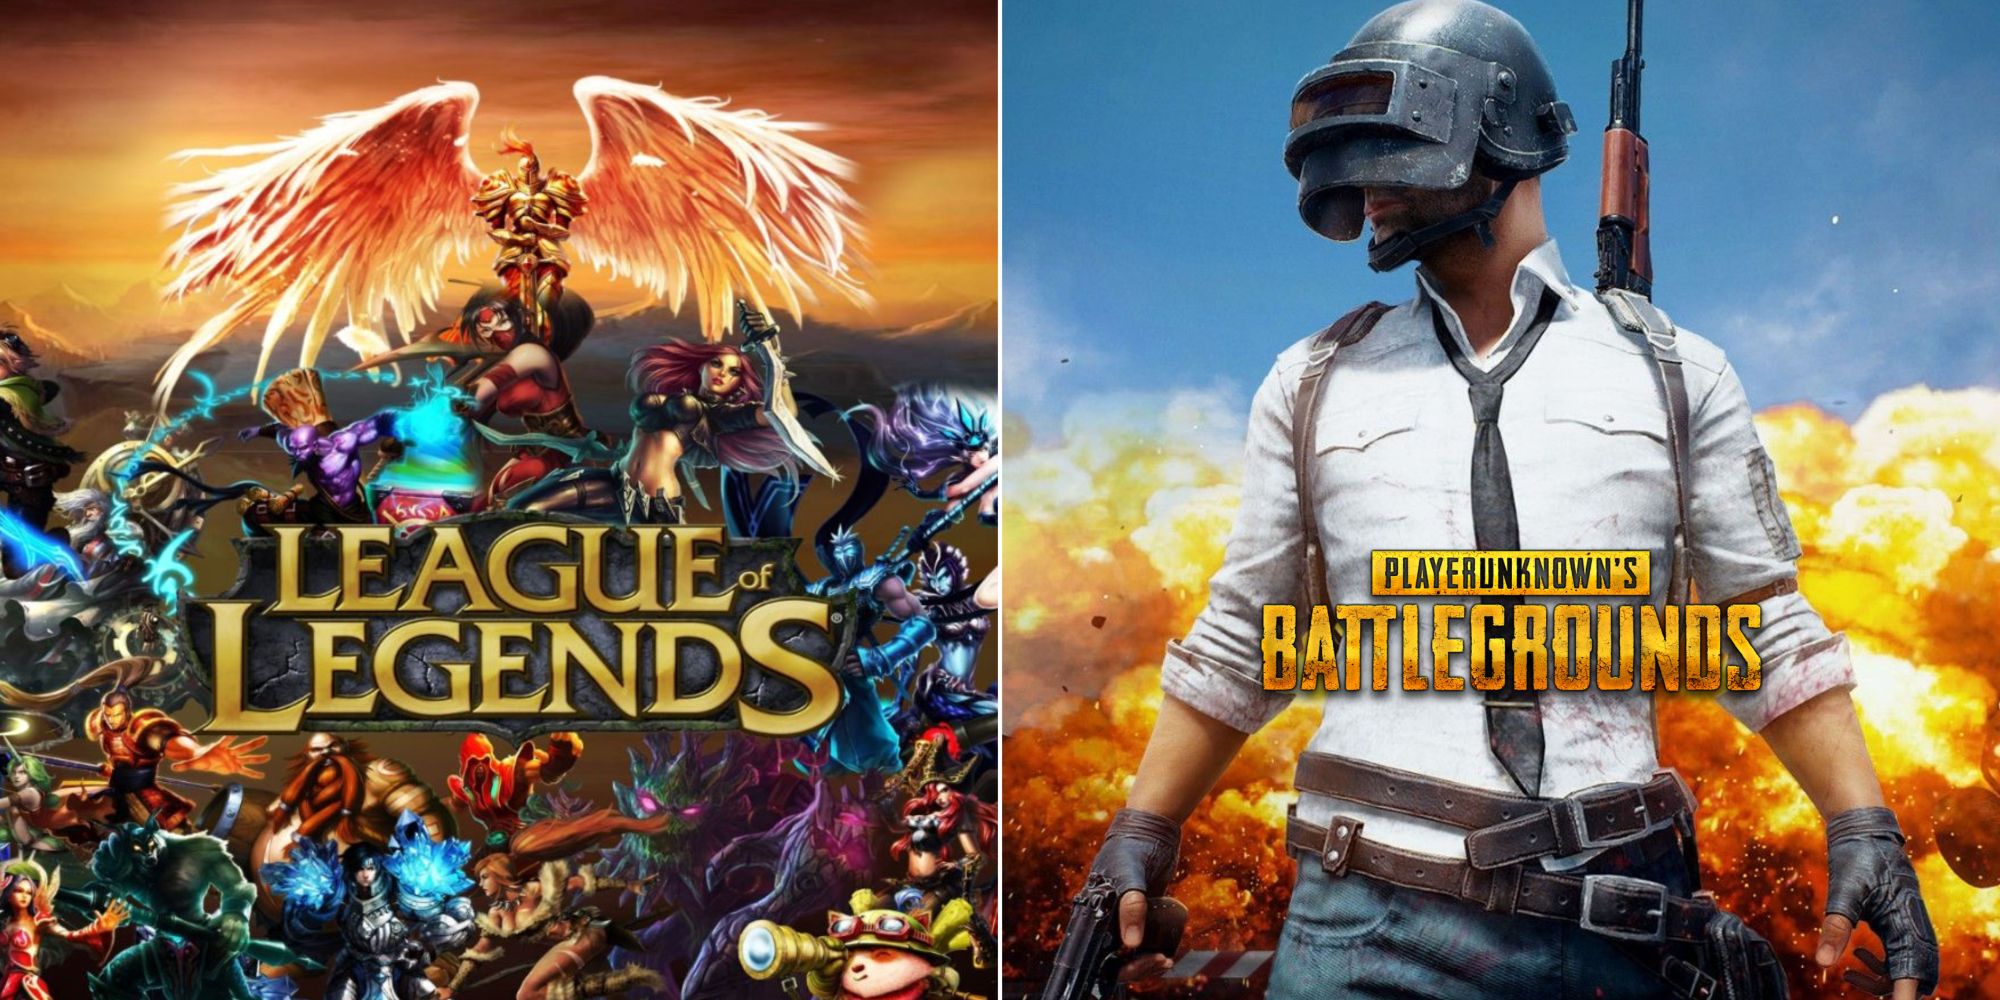 League of Legends characters and logo cover art (left) and PUBG covert art (right)